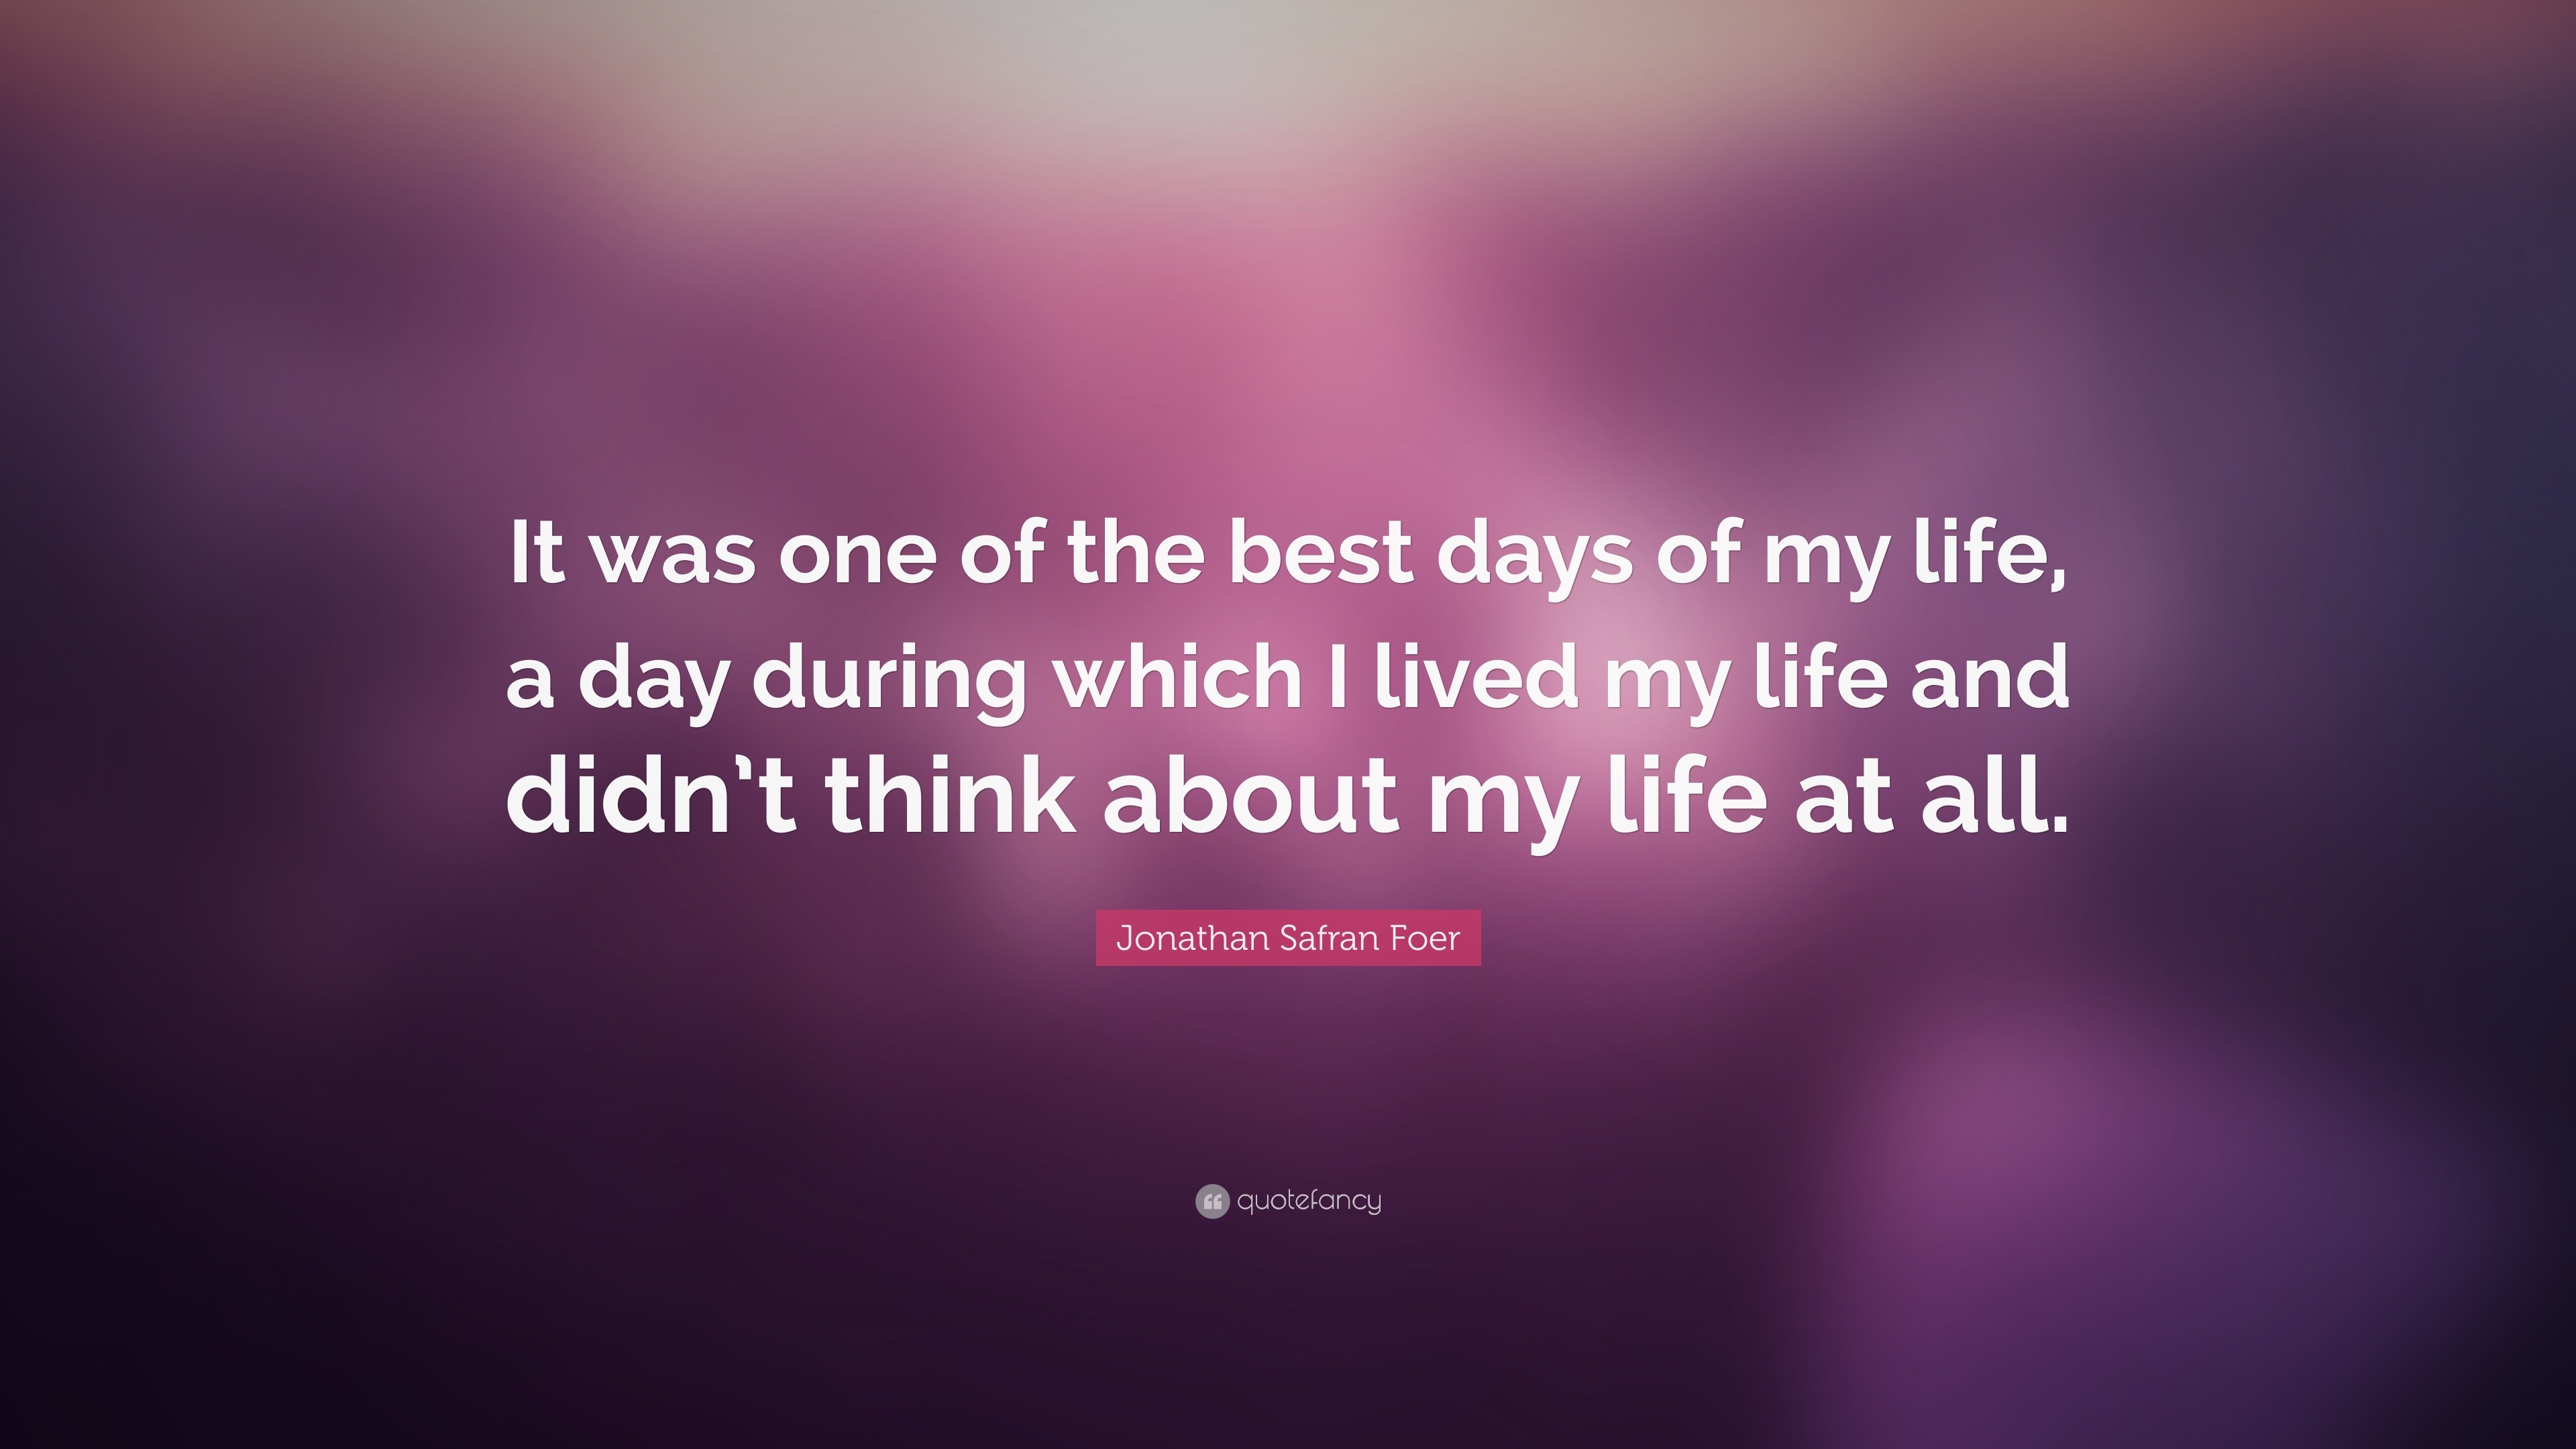 Jonathan Safran Foer Quote “It was one of the best days of my life